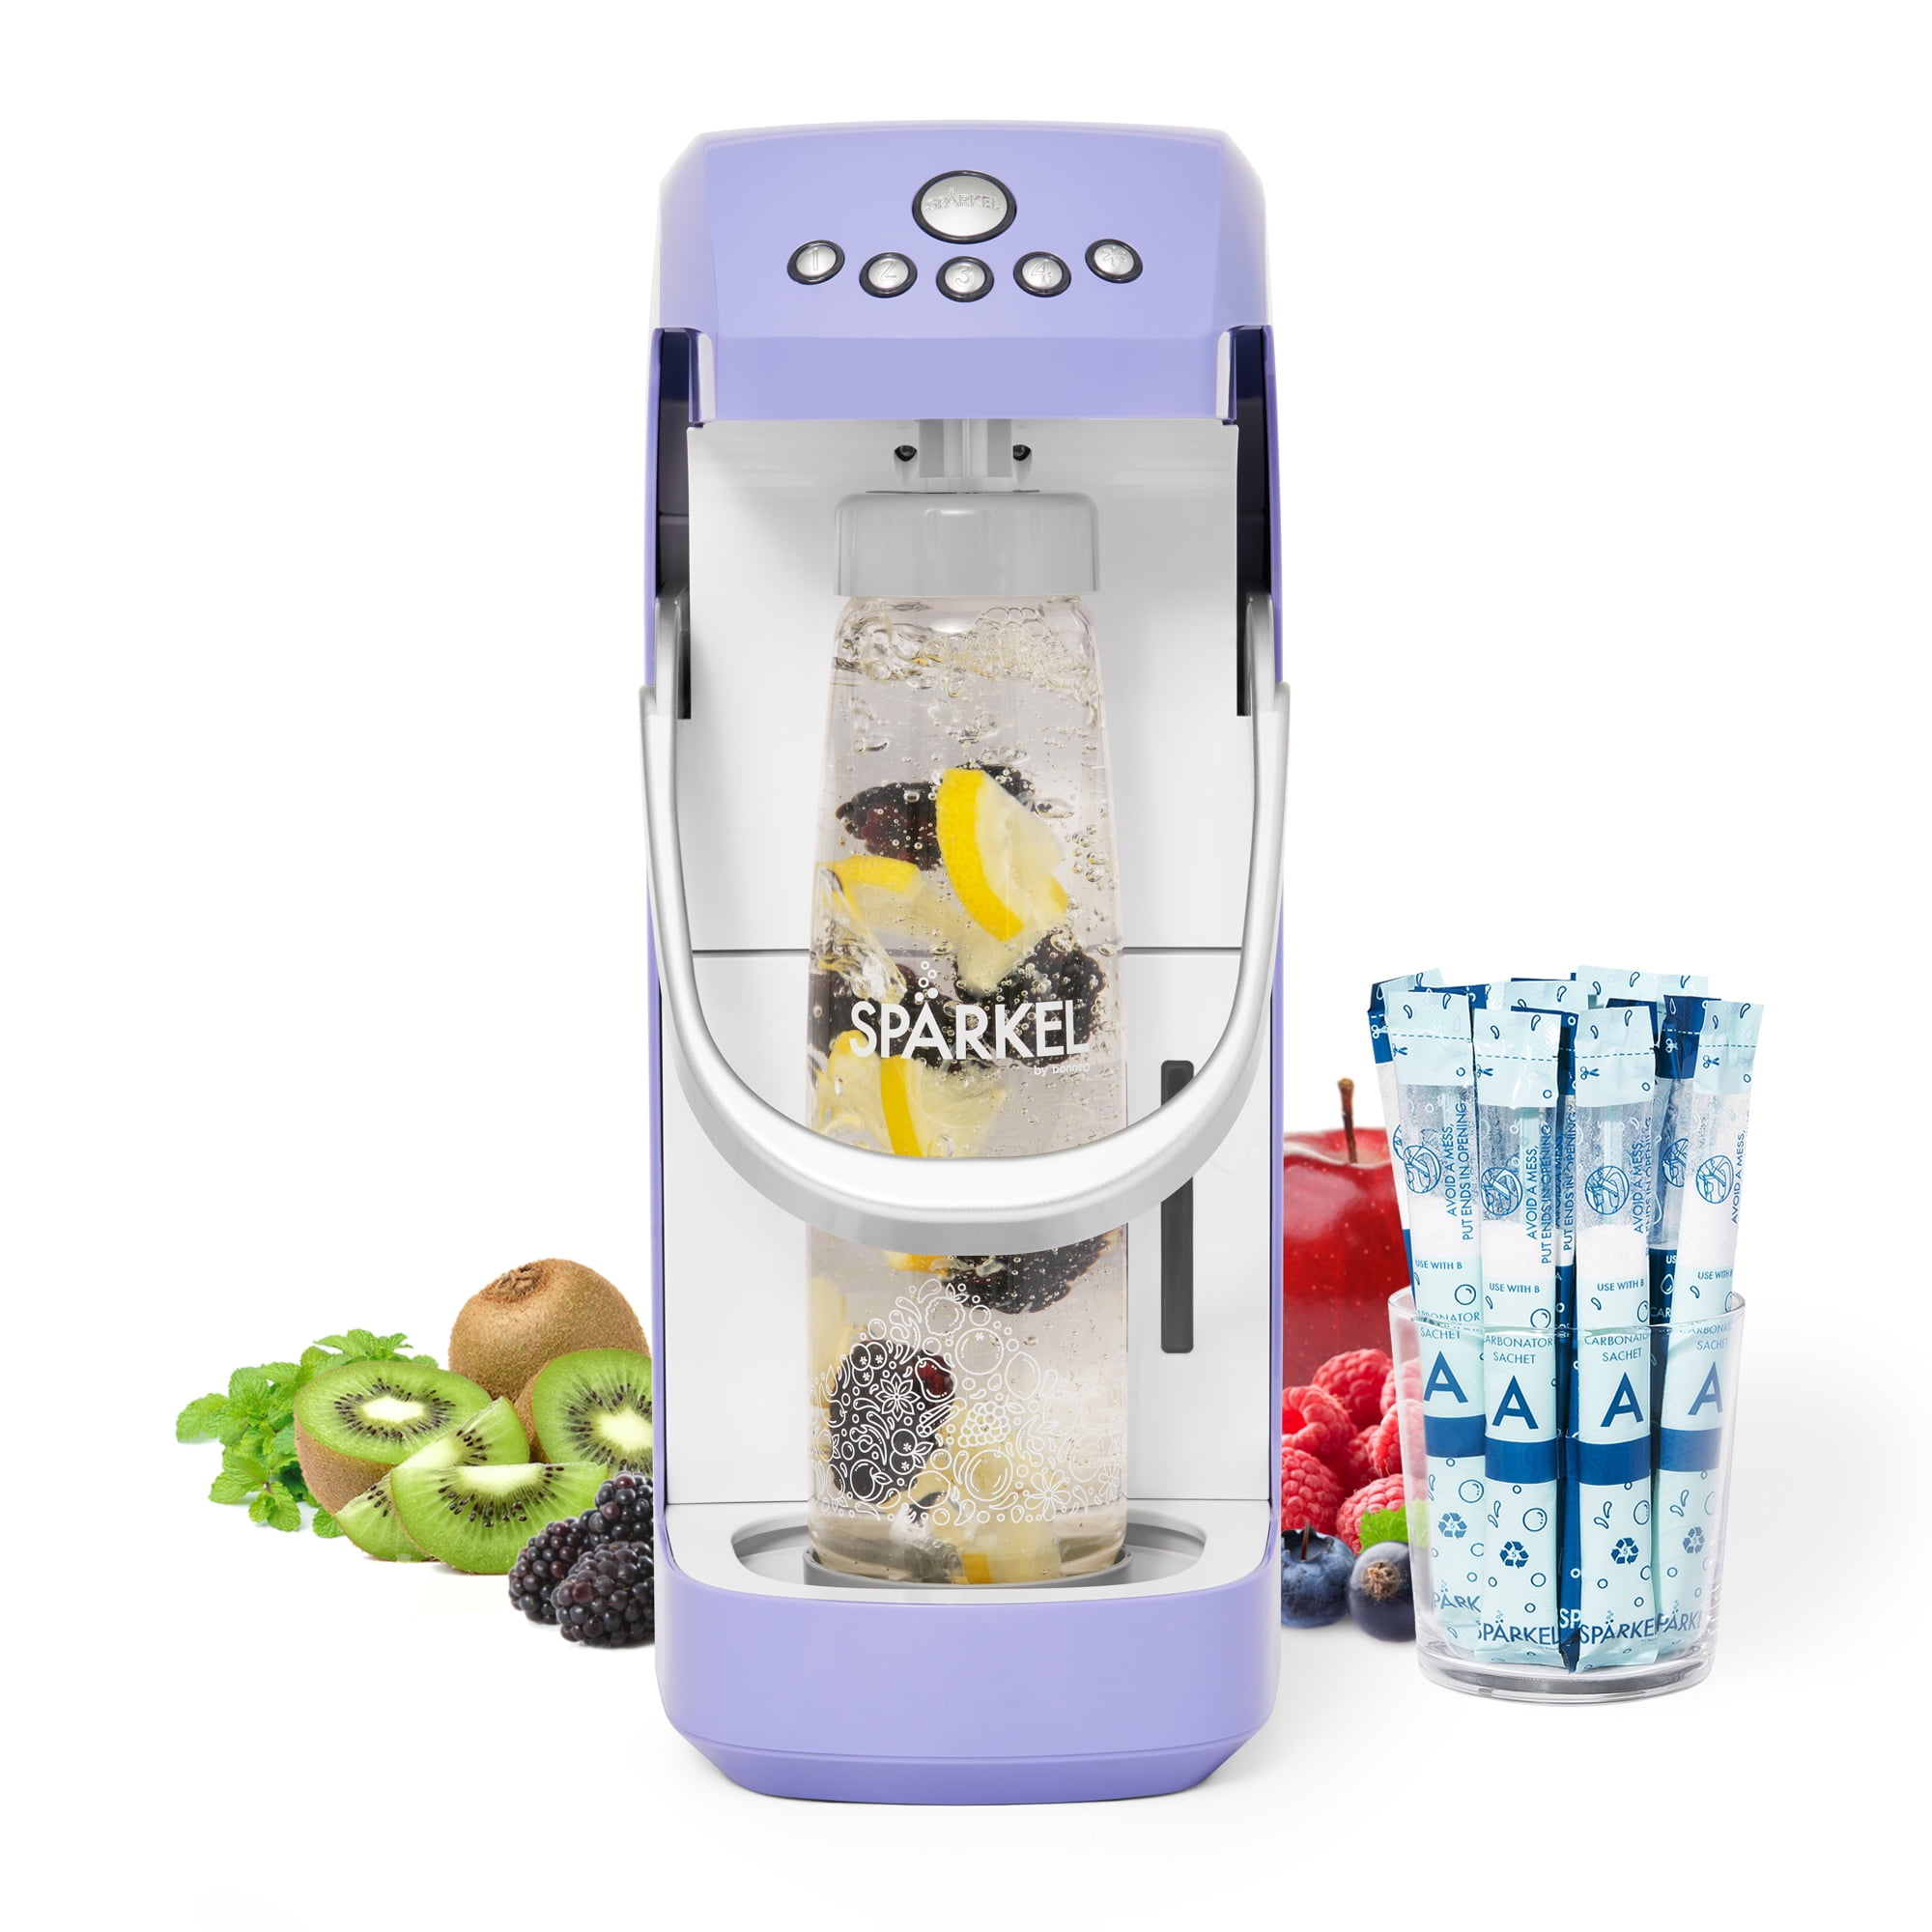 PSA: SodaStream blue screw-in CO2 canisters don't work for Ninja